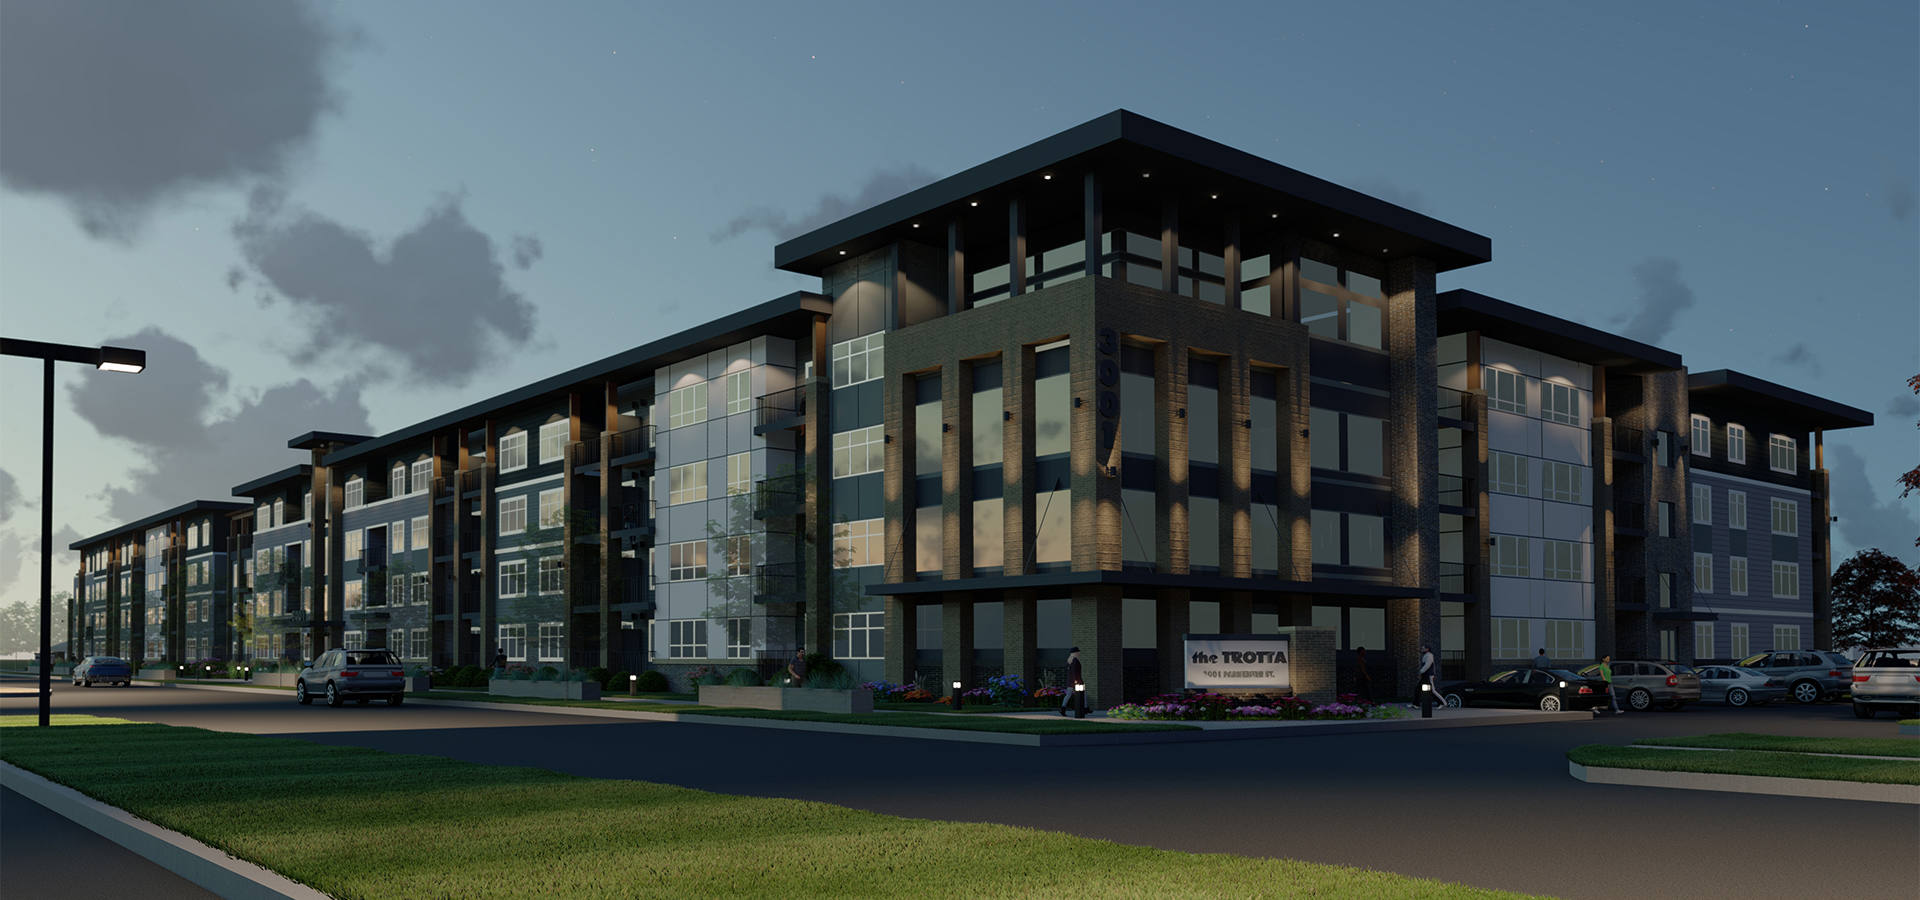 The Trotta Apartments Rendering